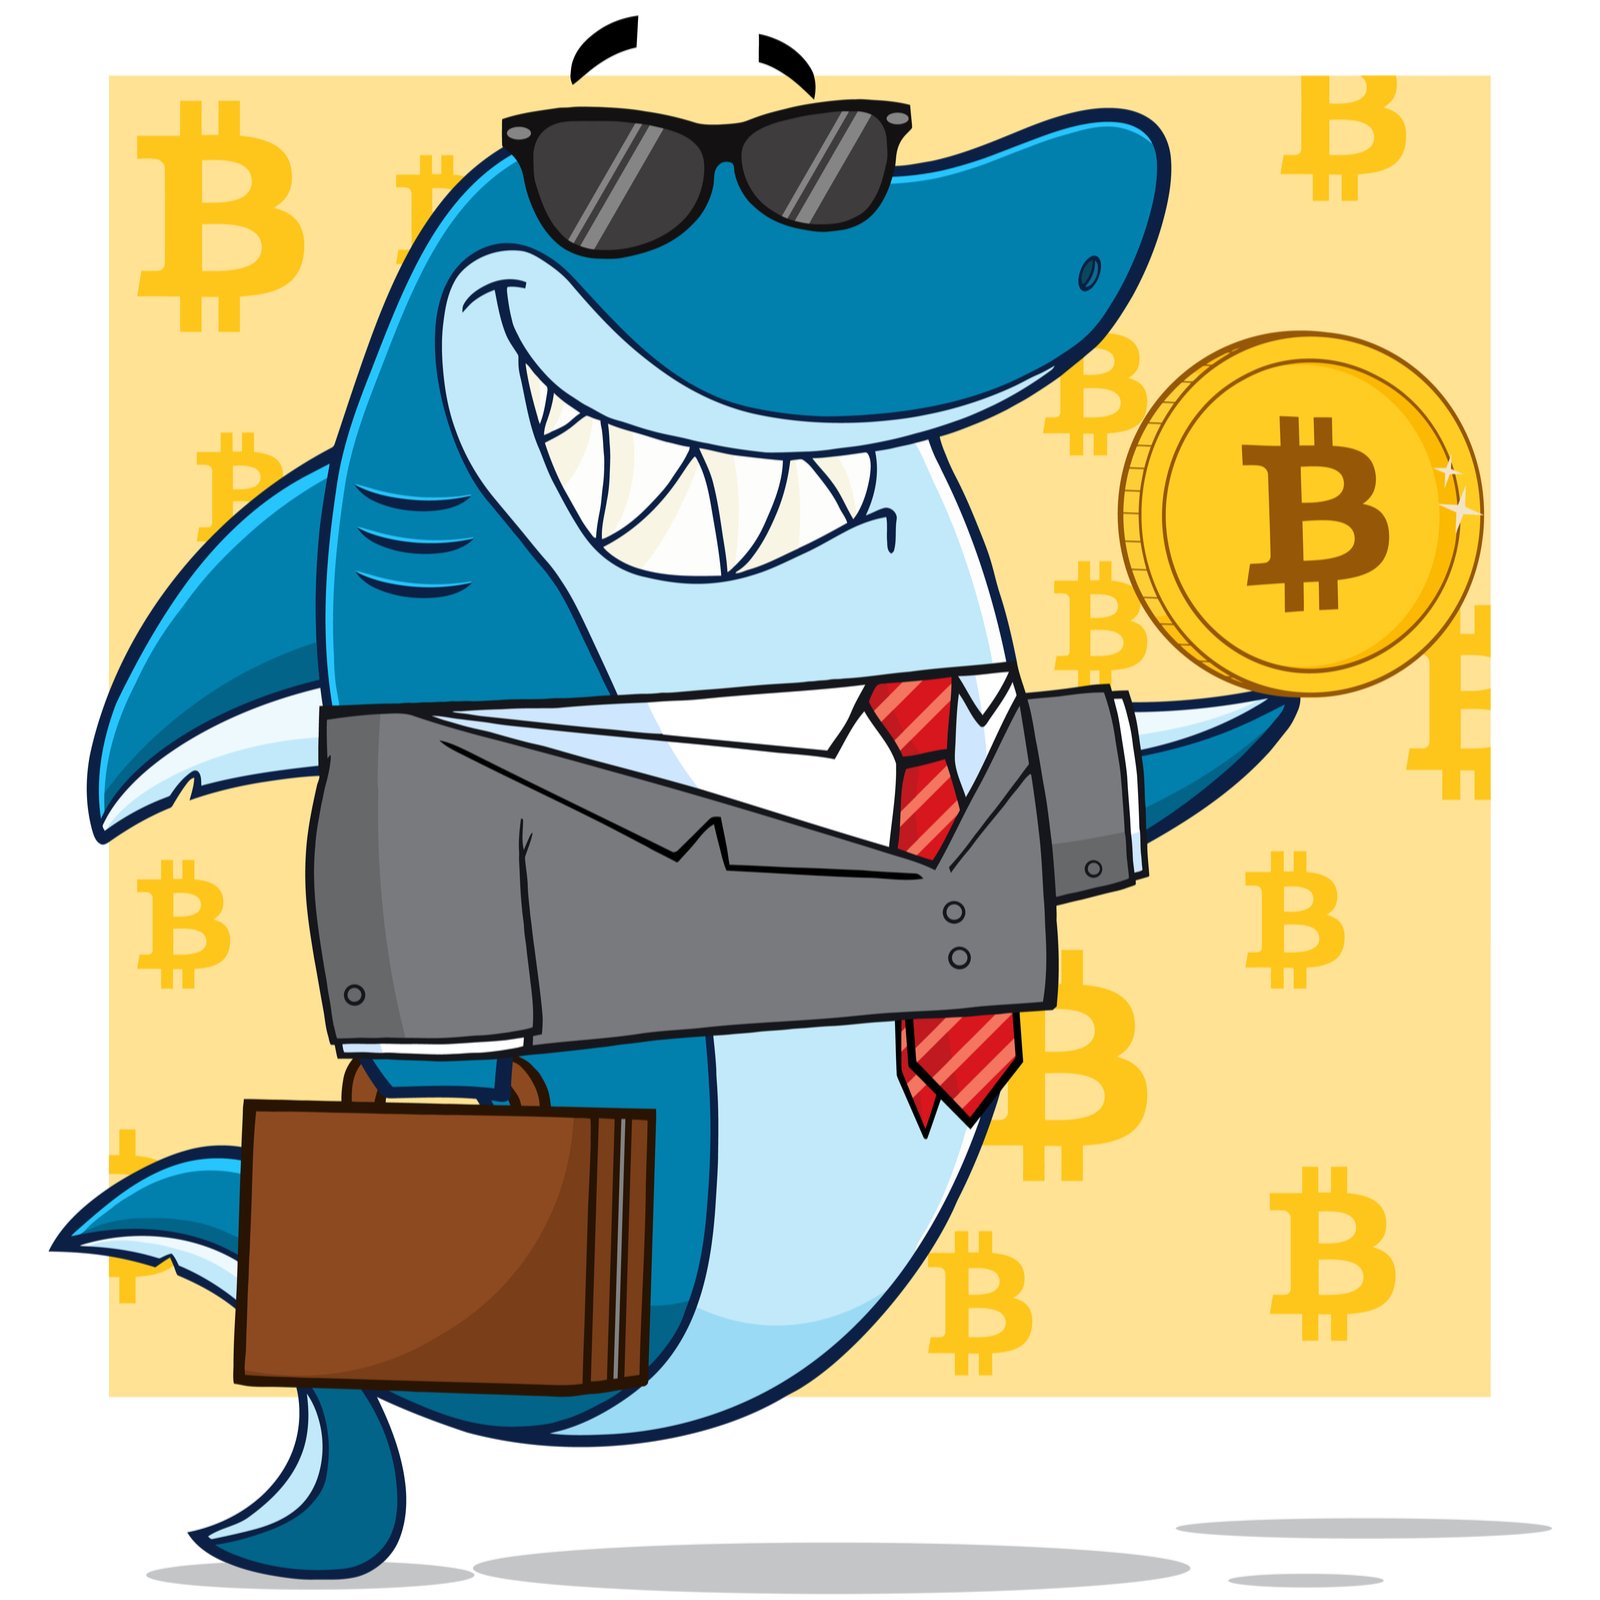 Automatic Cryptocurrency Buying App Gets $100,000 Investment on Shark Tank